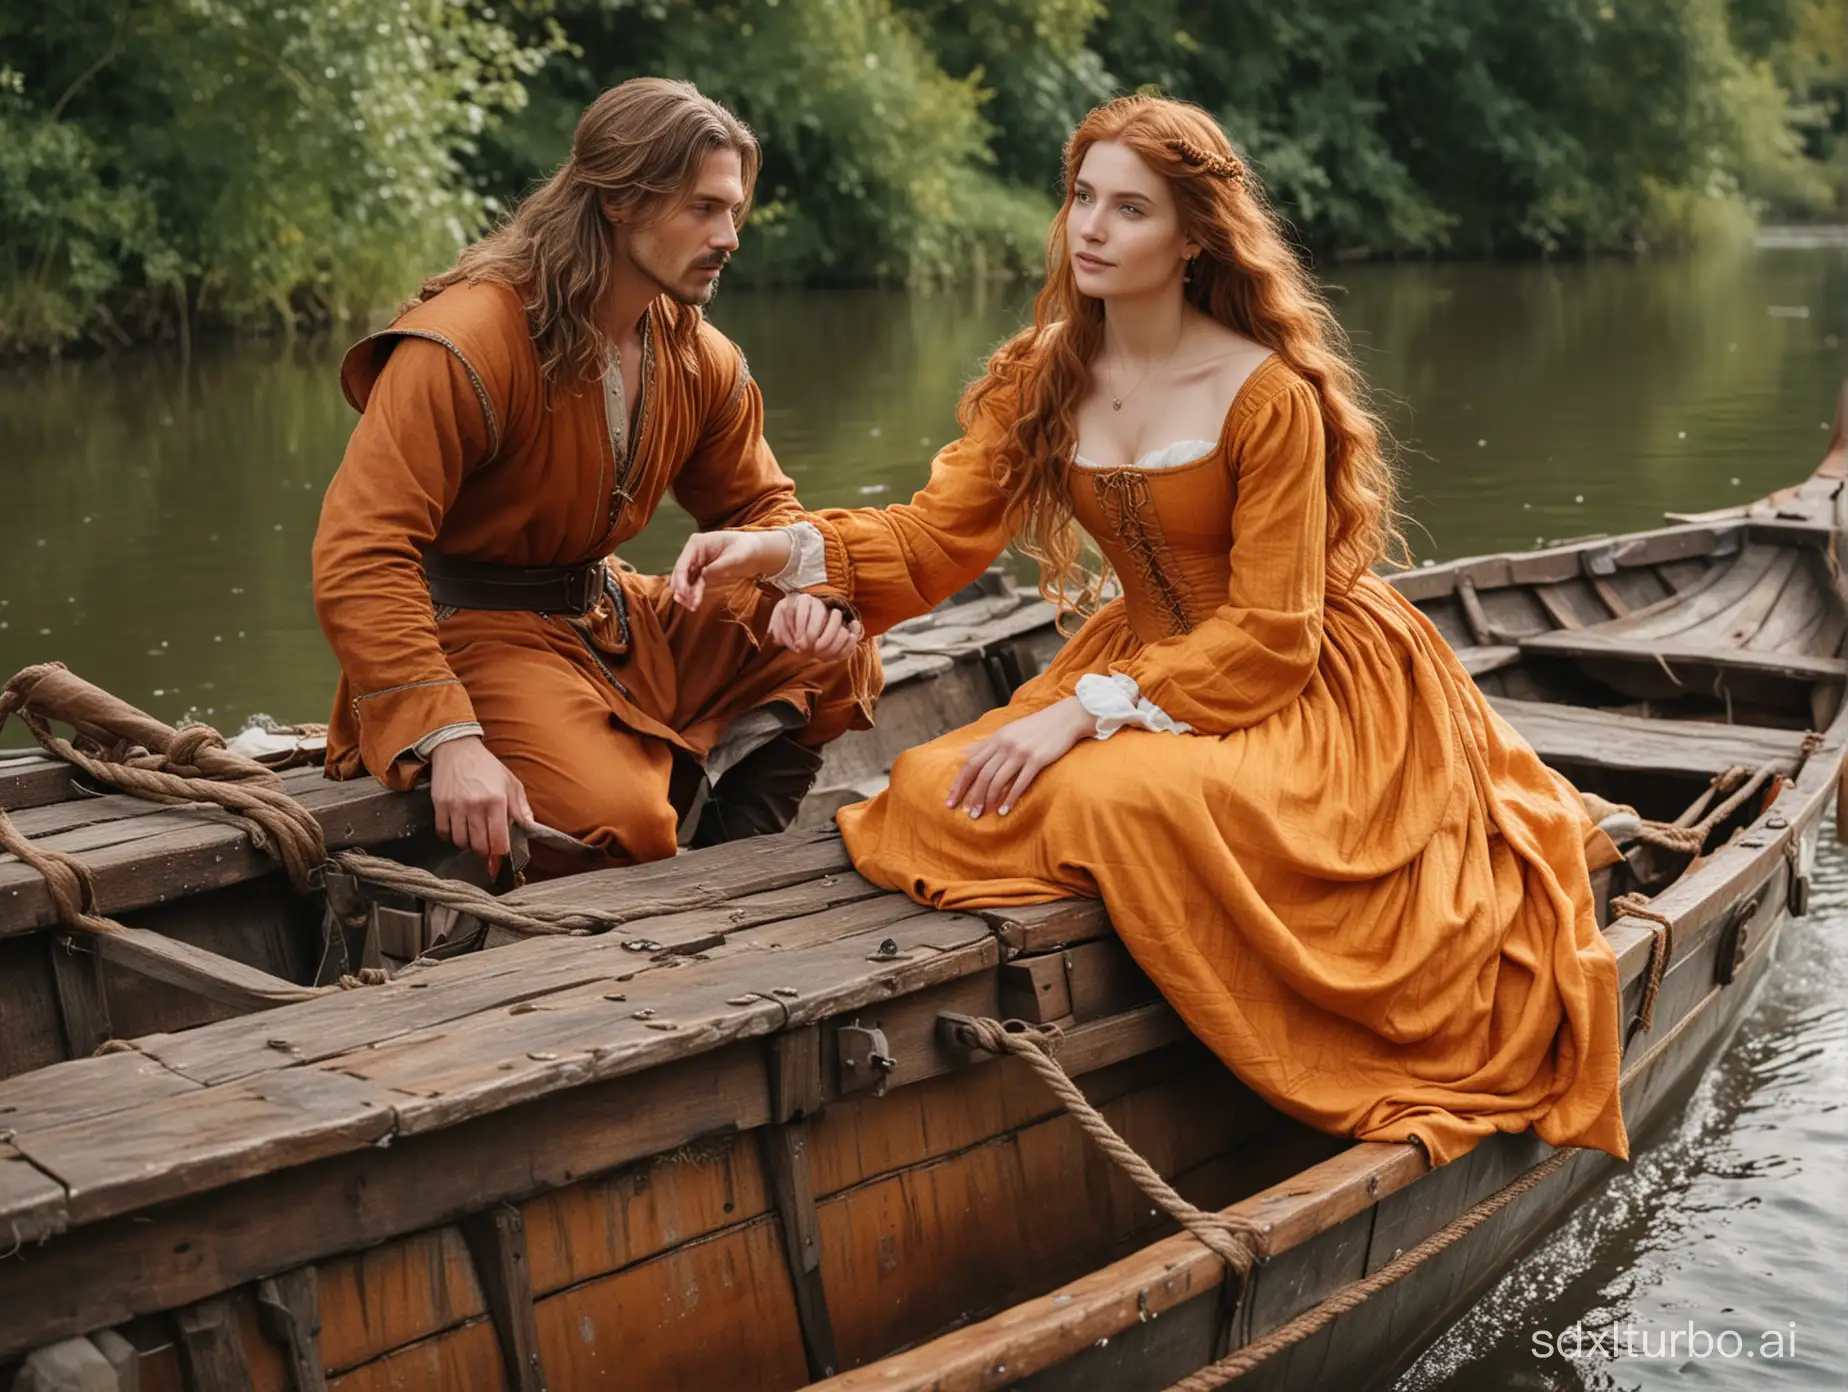 A handsome guy in his thirties with long brown hair in a beautiful medieval costume sits on an overturned boat by the river and looks at a russet-haired girl in a medieval gorgeous orange dress with a large neckline, who has put her bare foot on the boat and is pushing back her wet hair